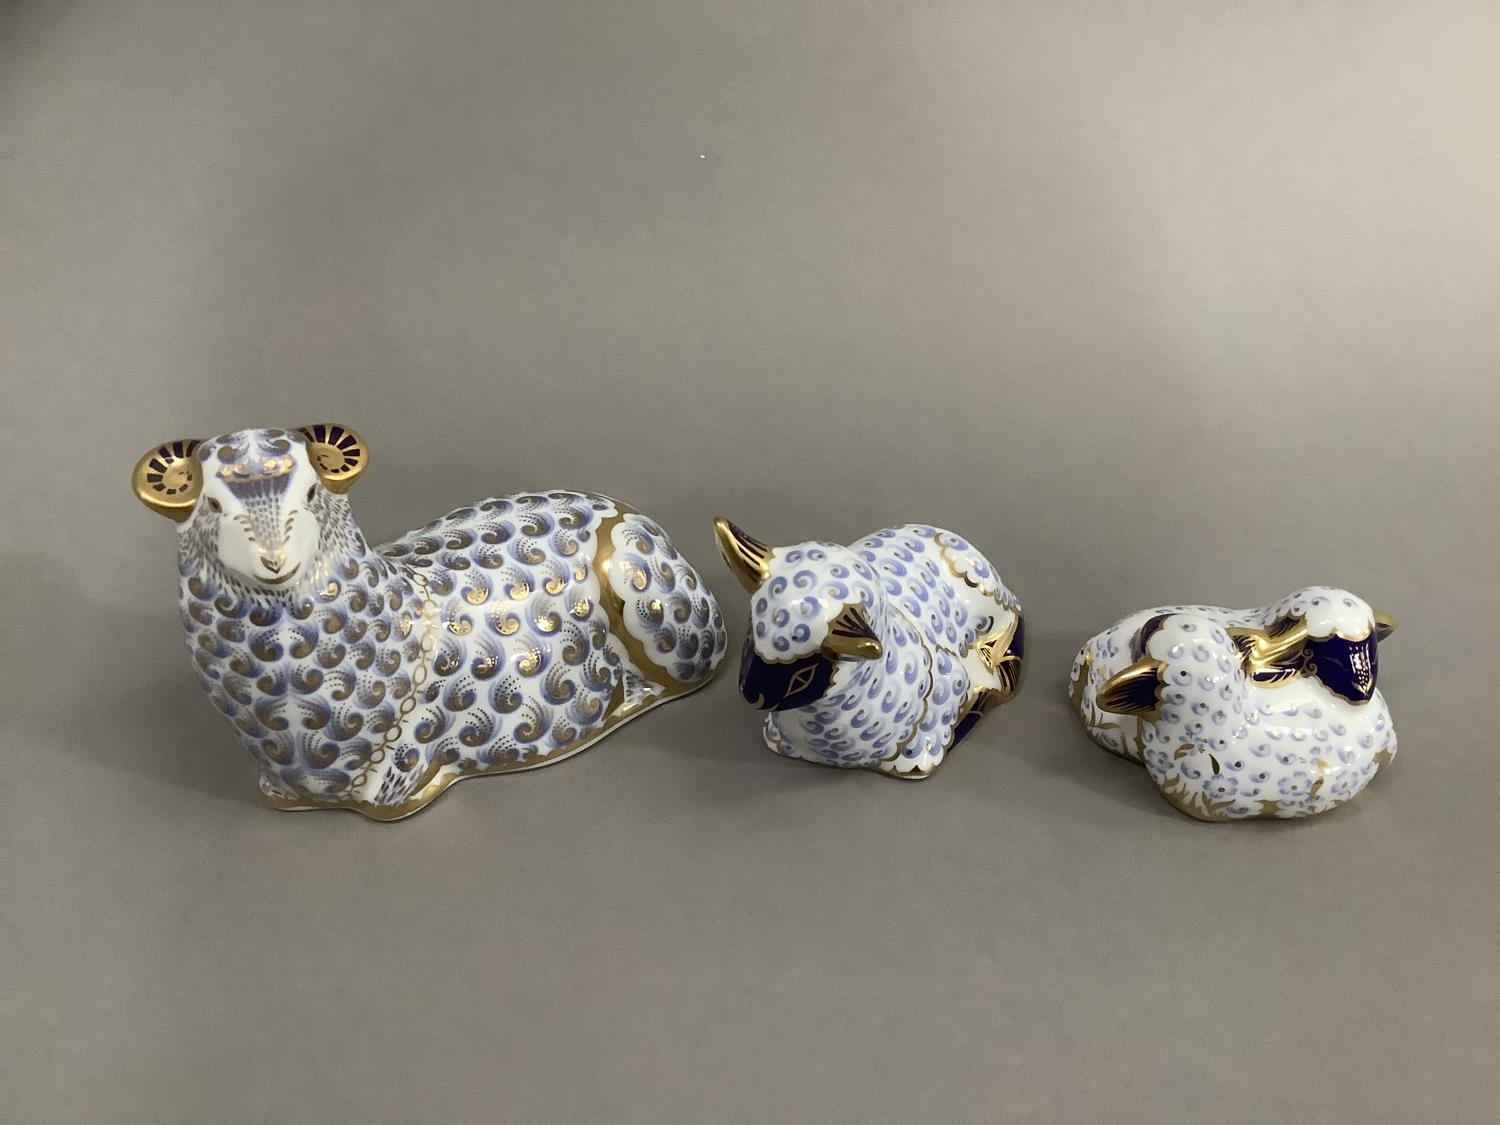 A Royal Crown Derby ram, ewe and two lambs, silver buttons (3) 7.5cm, 6.5cm and 4 cm high - Image 3 of 5